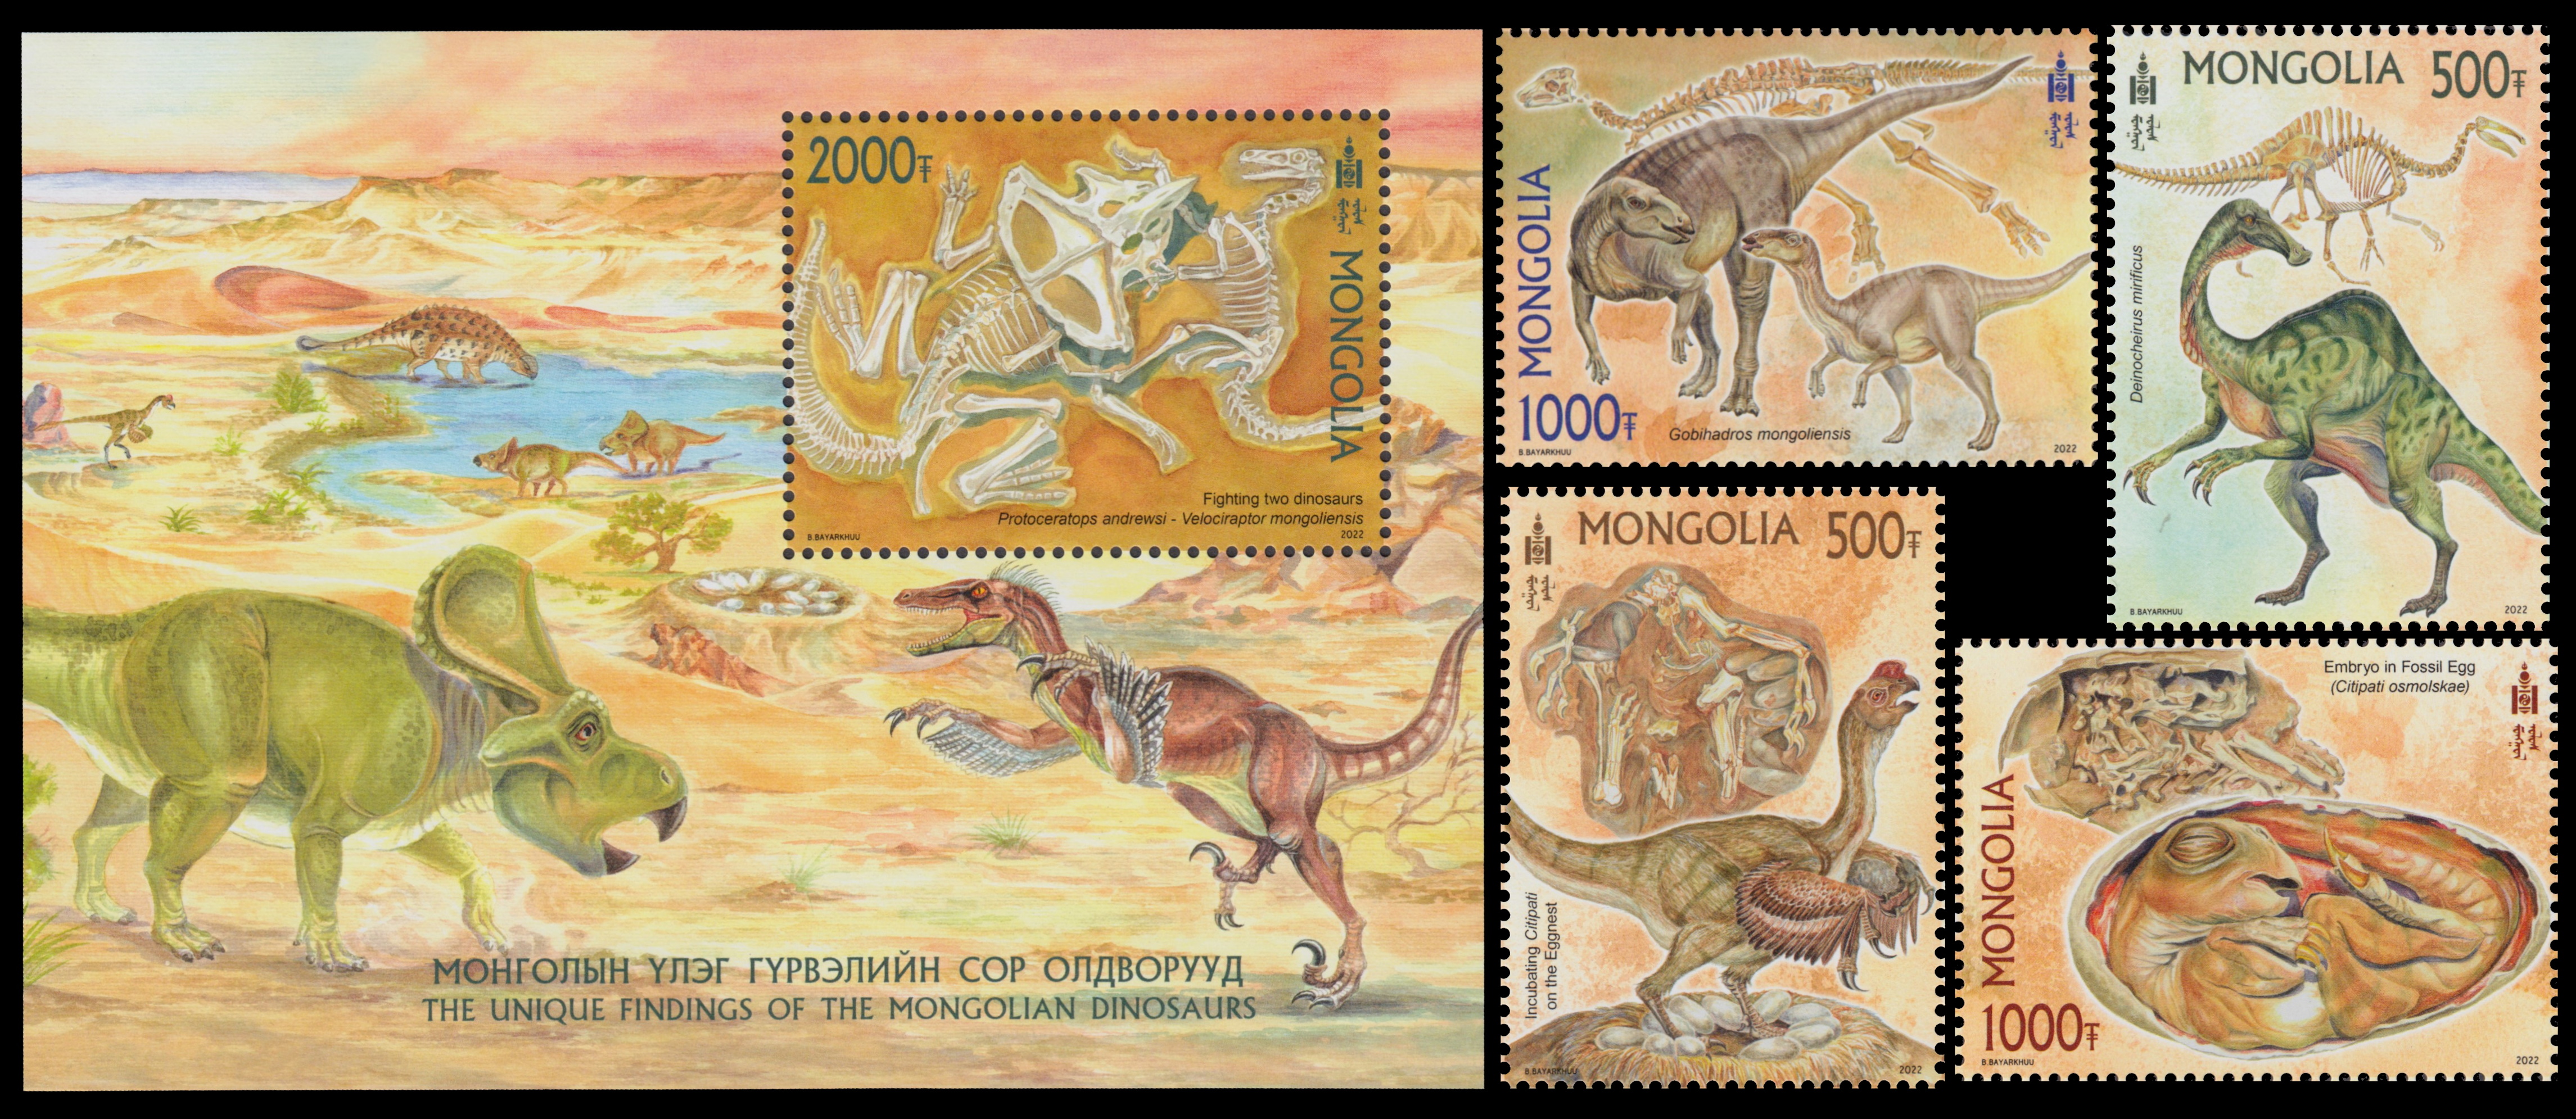 The Unique Discoveries Of The Mongolian Dinosaurs on stamps 2022